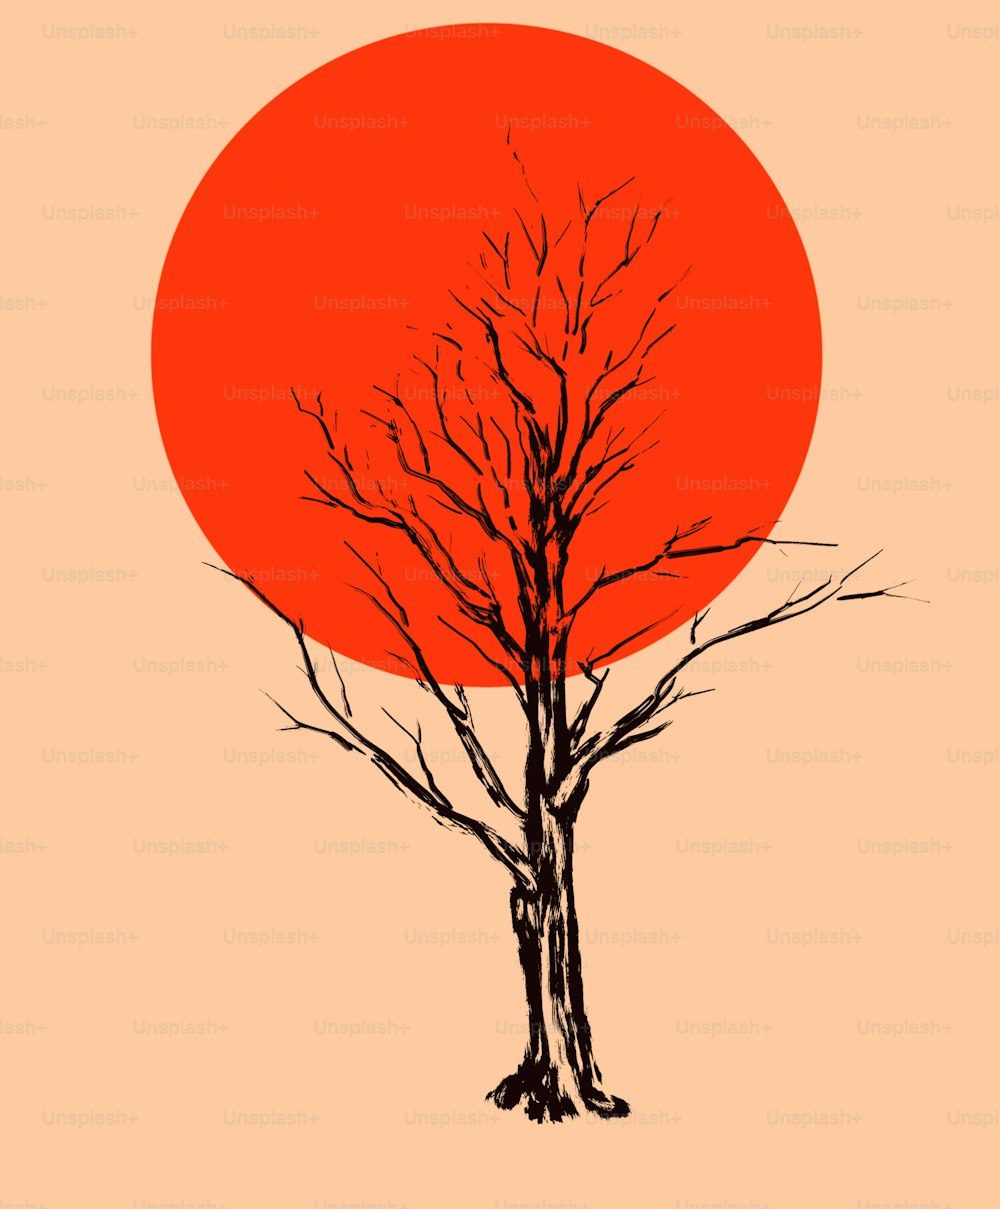 A dried tree against the background of a red-hot sun disc. Vertical format